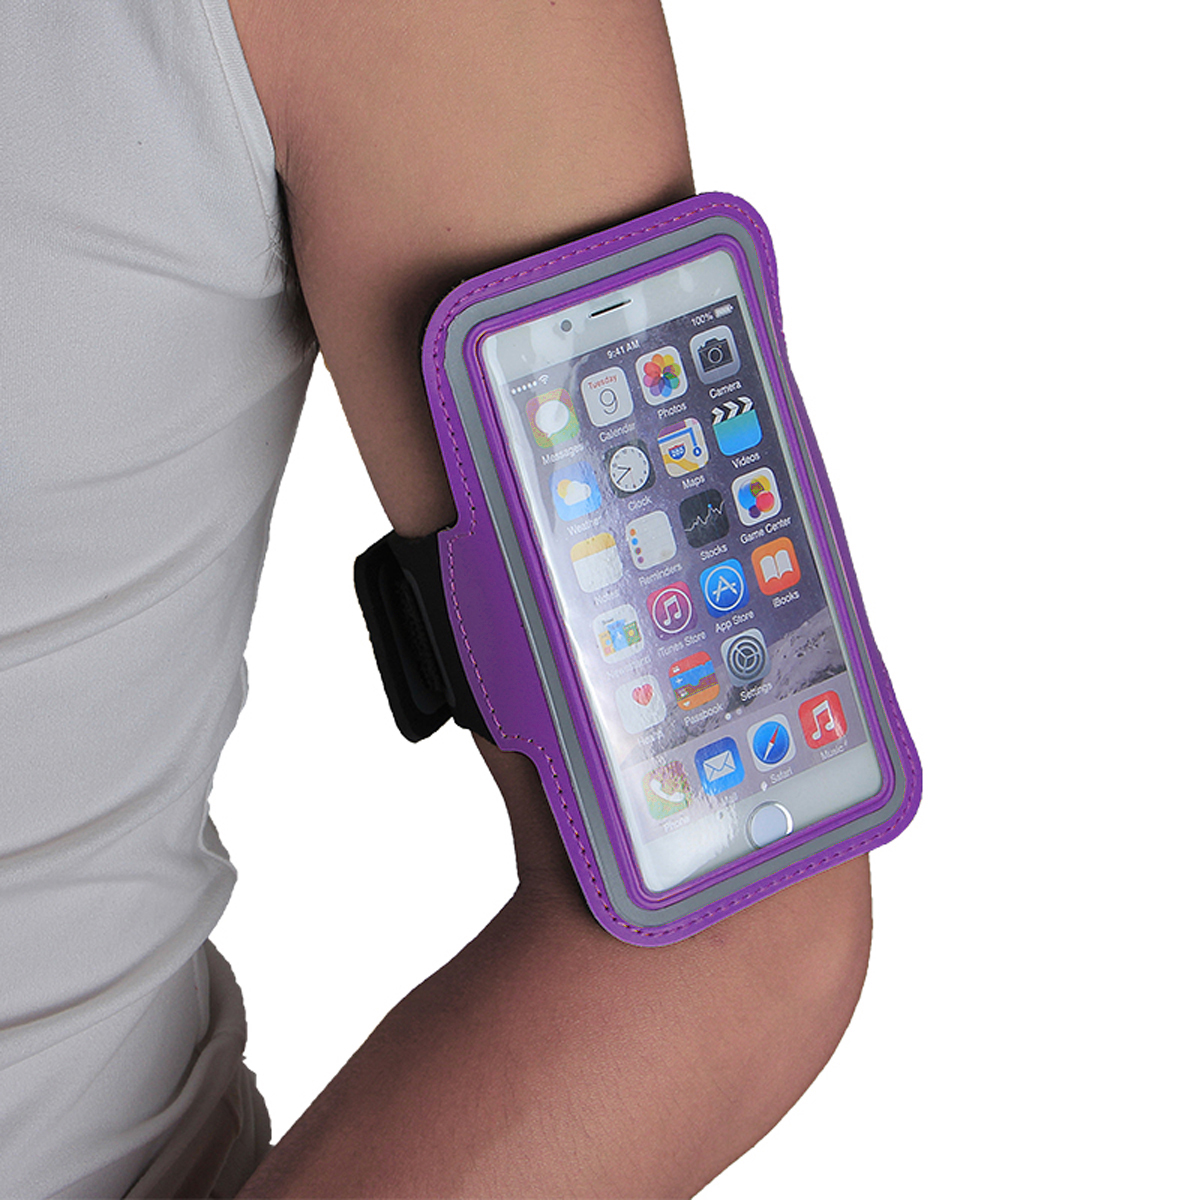 Universal-Sports-Elastic-Armband-Sweatproof-Touch-Screen-Mobile-Phone-Arm-Bags-with-Earphone-Port-fo-1890485-9